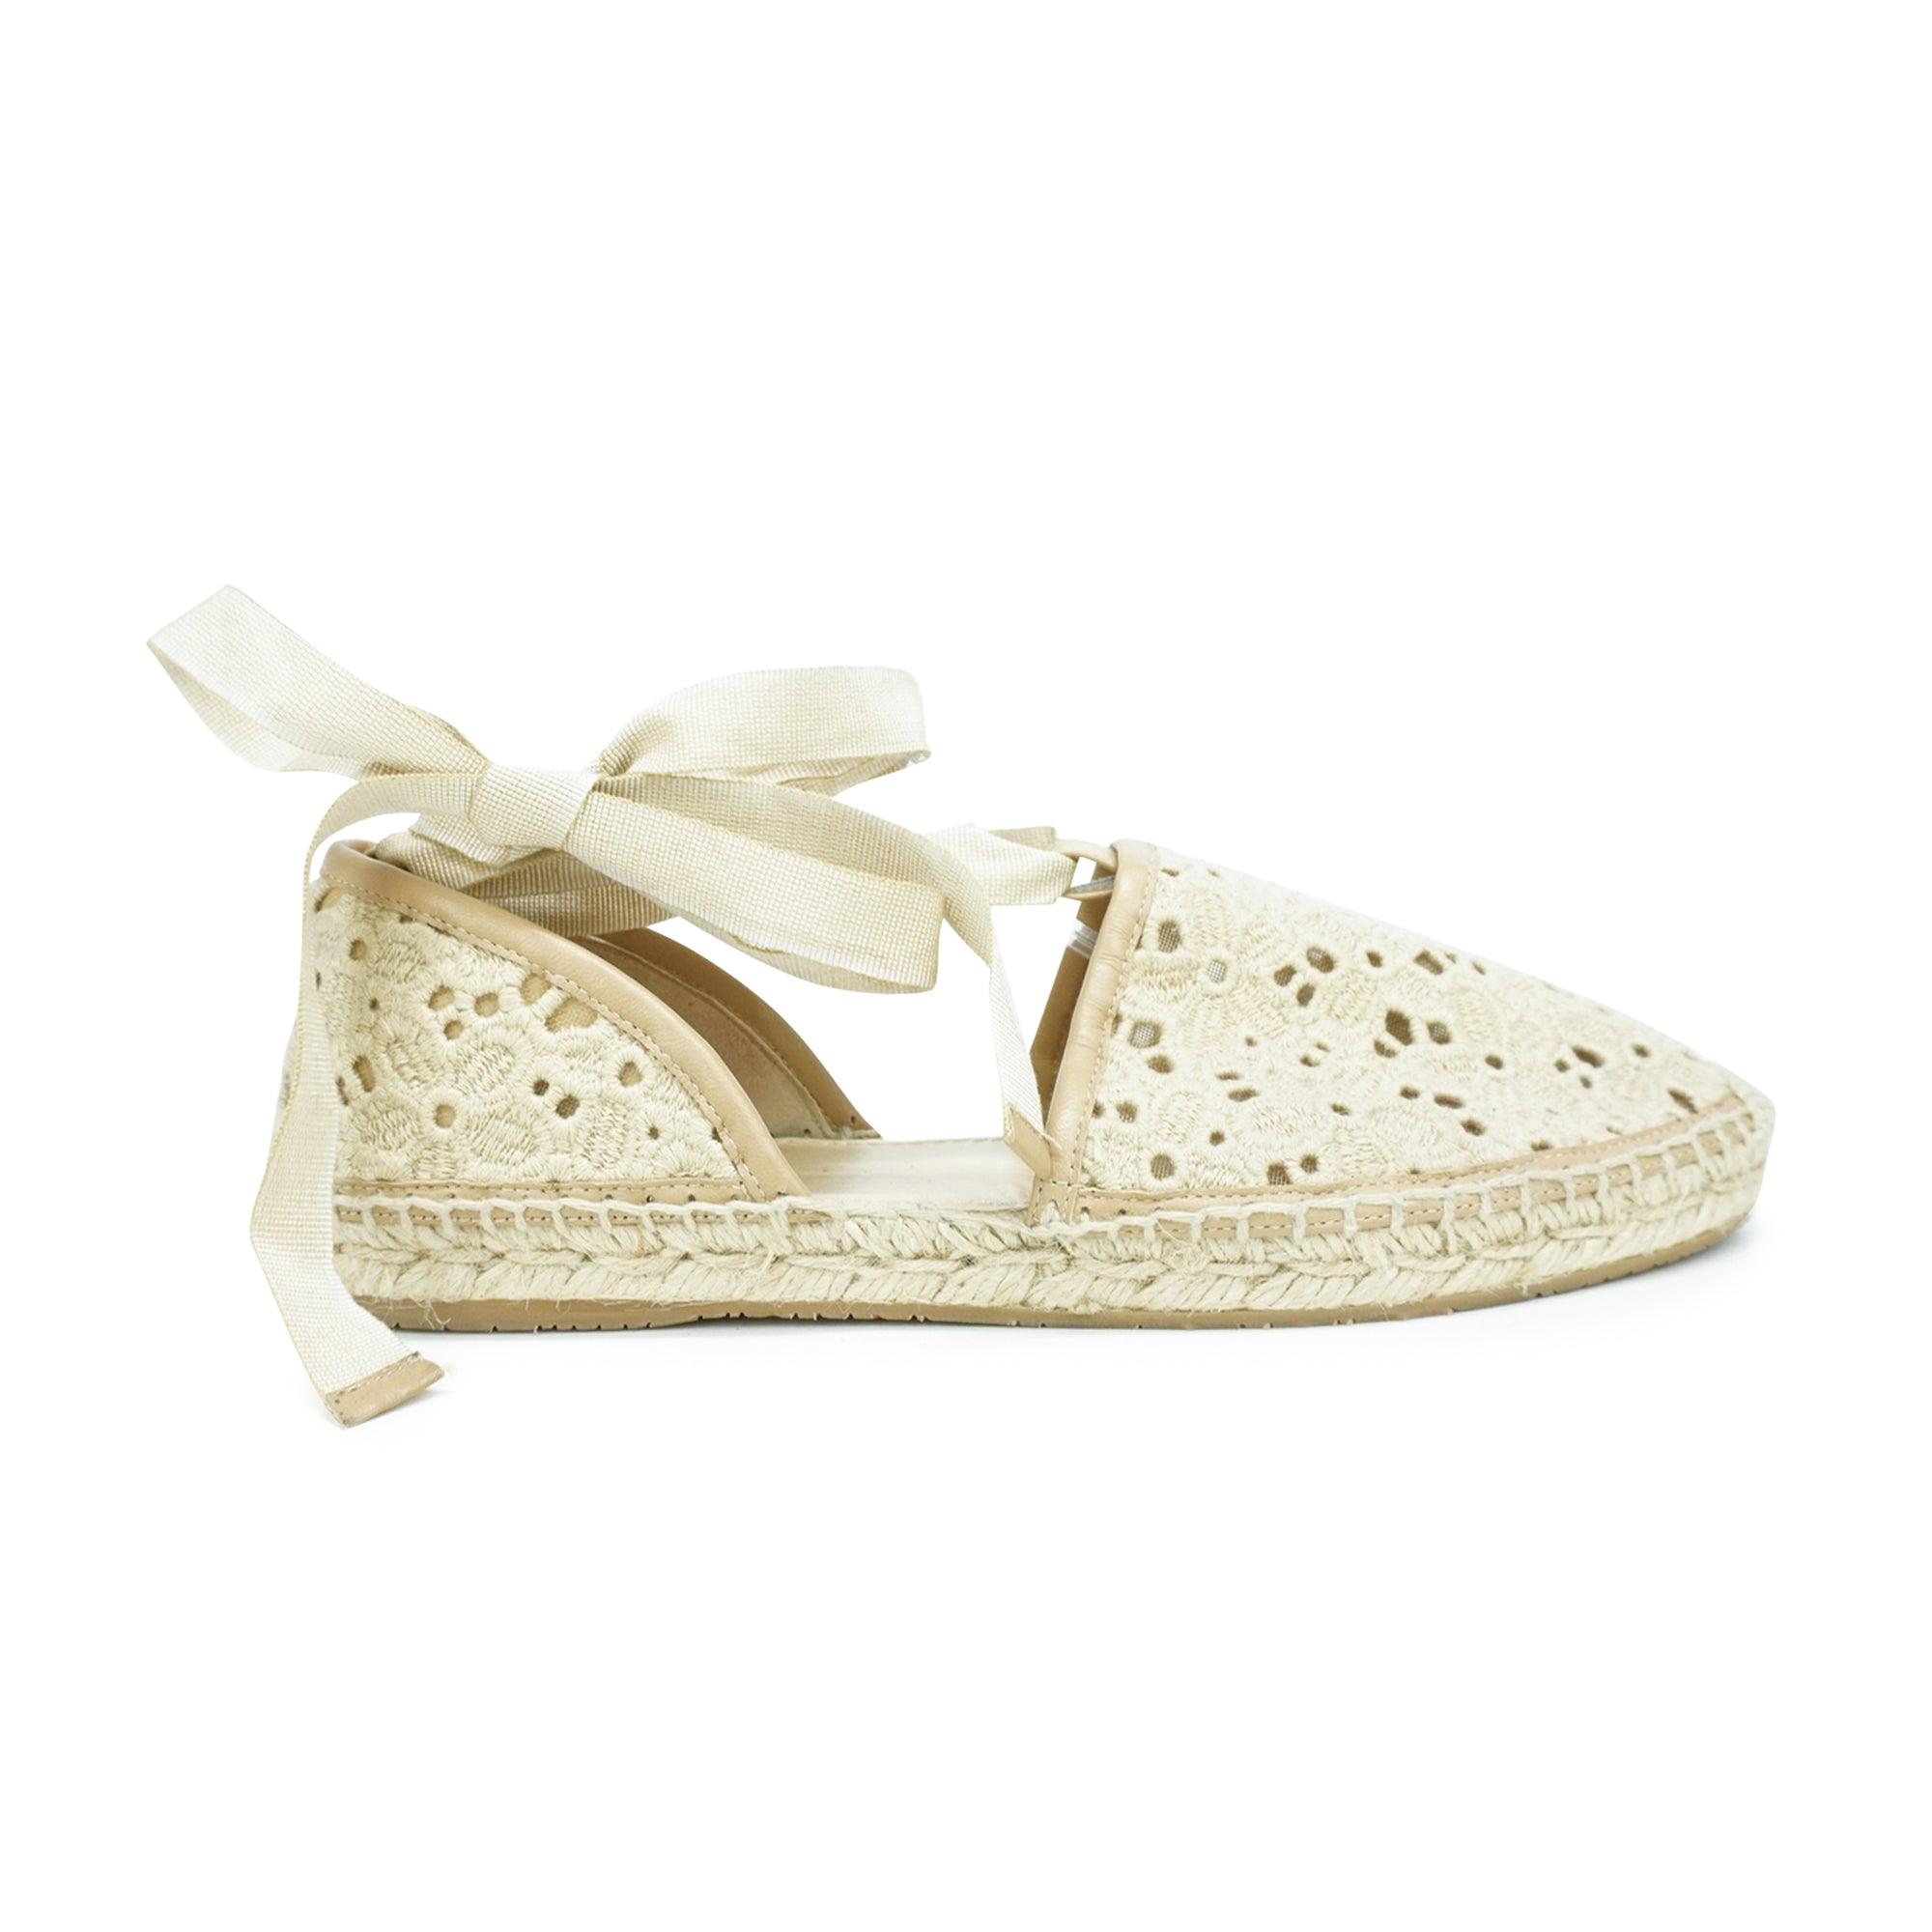 Jimmy Choo Espadrille Sandals - Women's 40 - Fashionably Yours